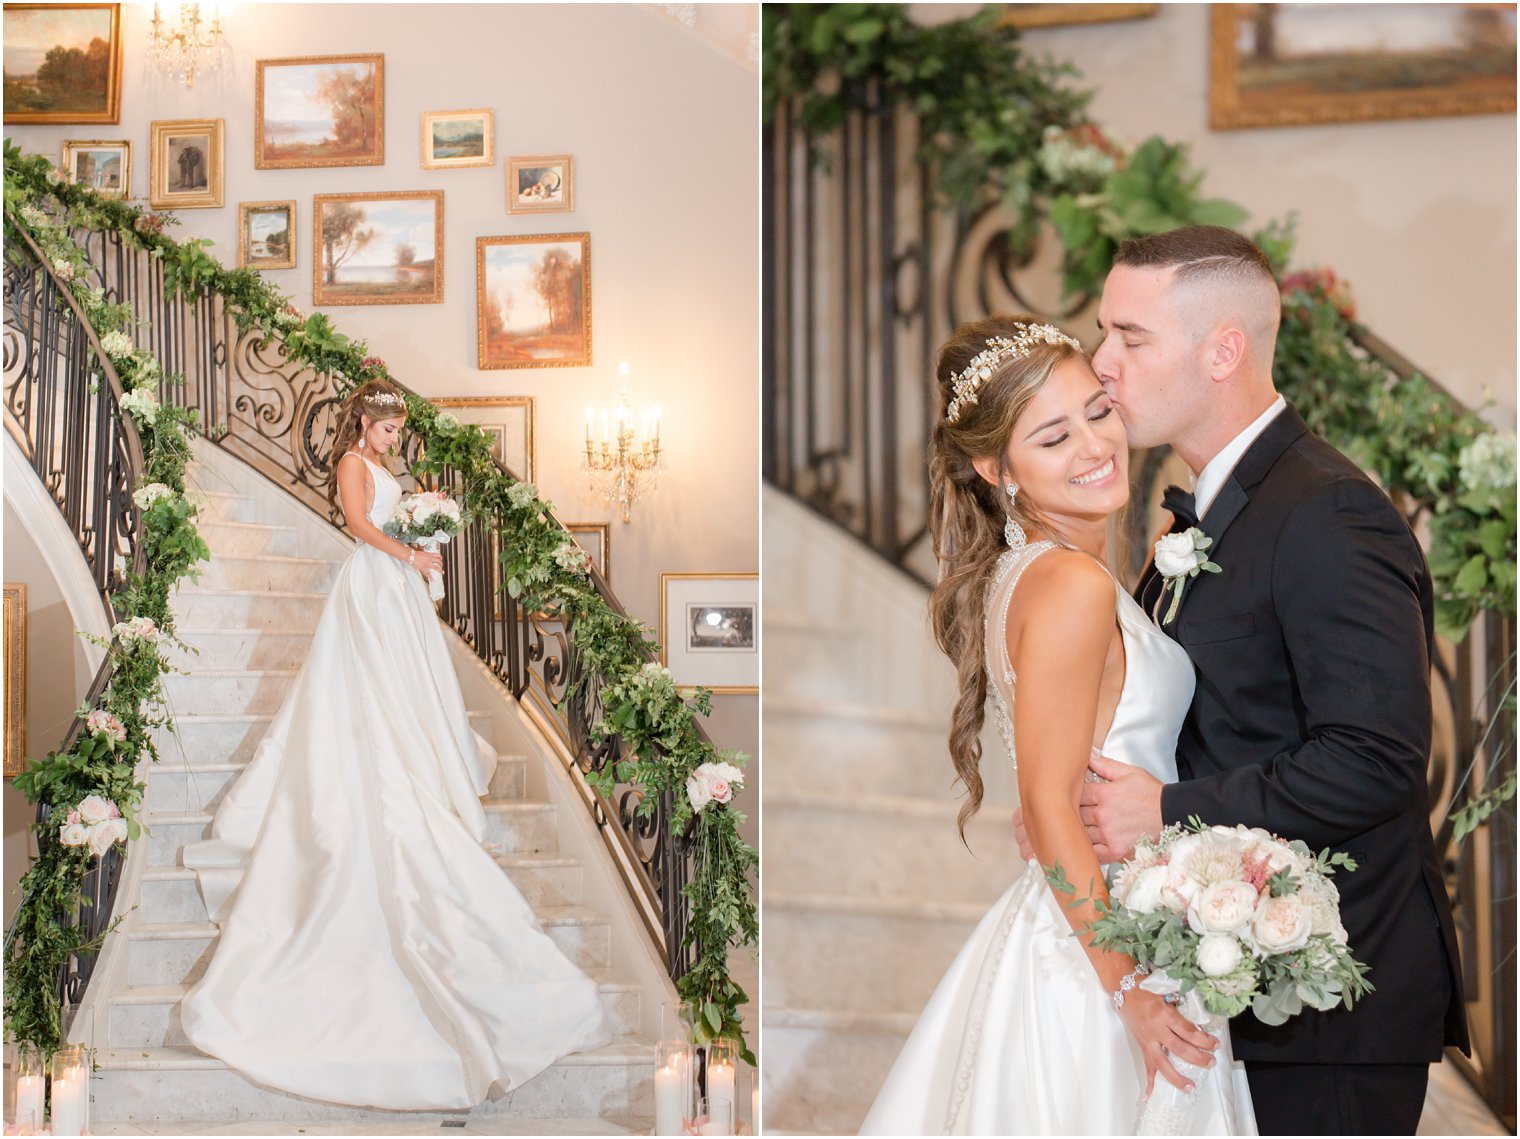 Beautiful wedding portrait in French-inspired chateau venue in NJ